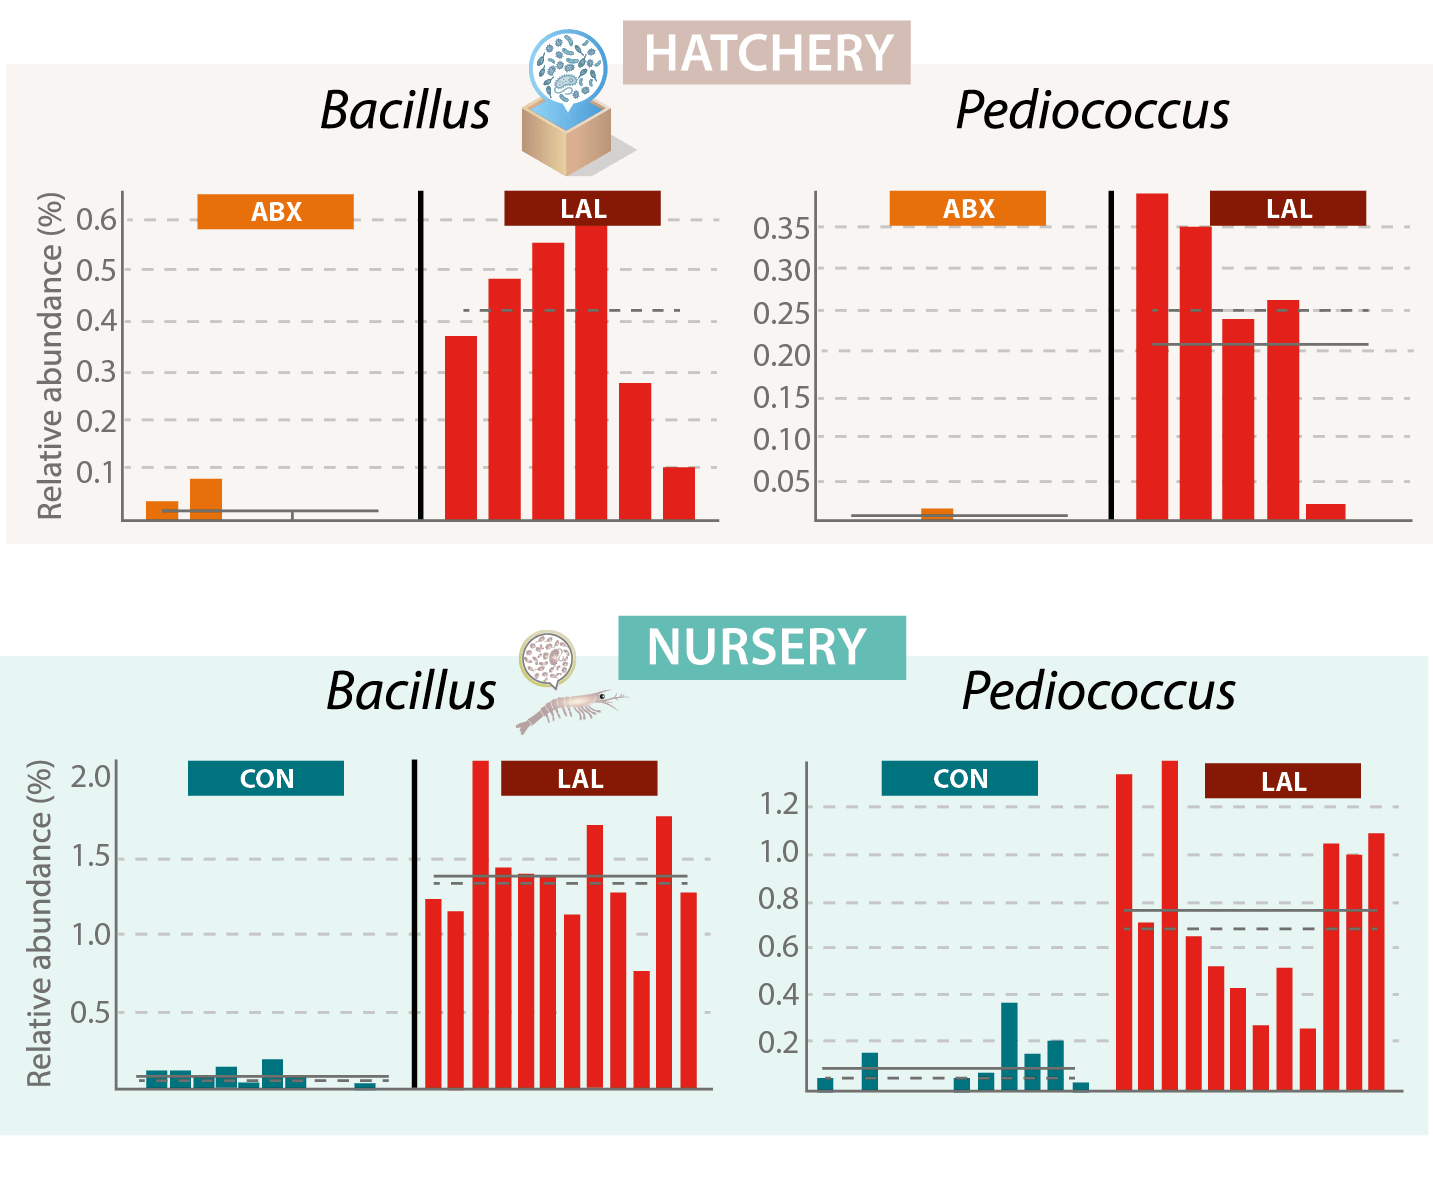 Relative abundance of Bacillus and Pediococcus in ABX and LAL treatments in hatchery water and nursery shrimp gut microbiota